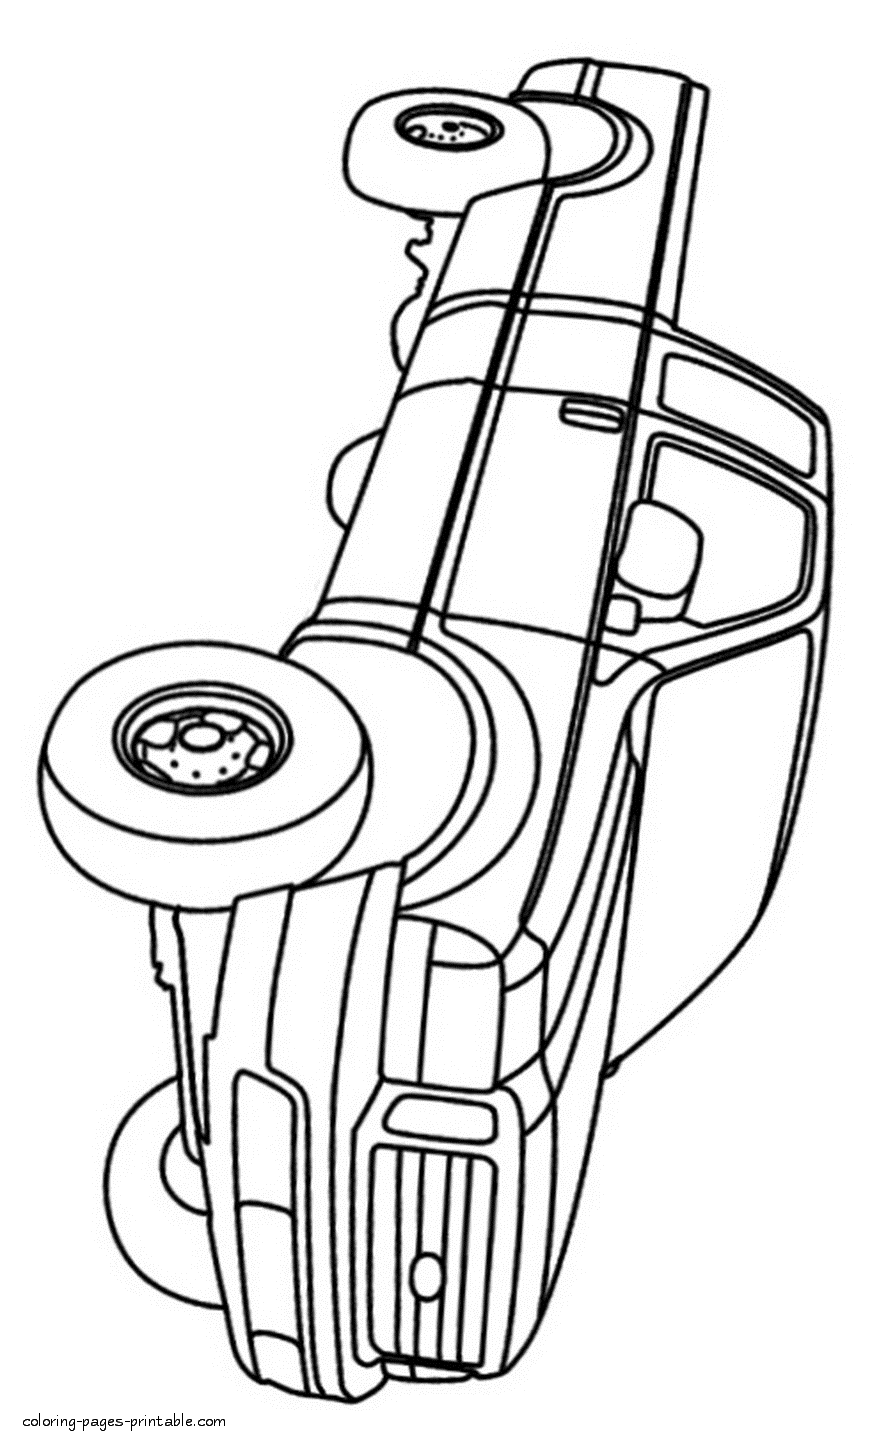 Featured image of post Truck Coloring Pages Ford You might also be interested in coloring pages from ford category and pickup trucks tag